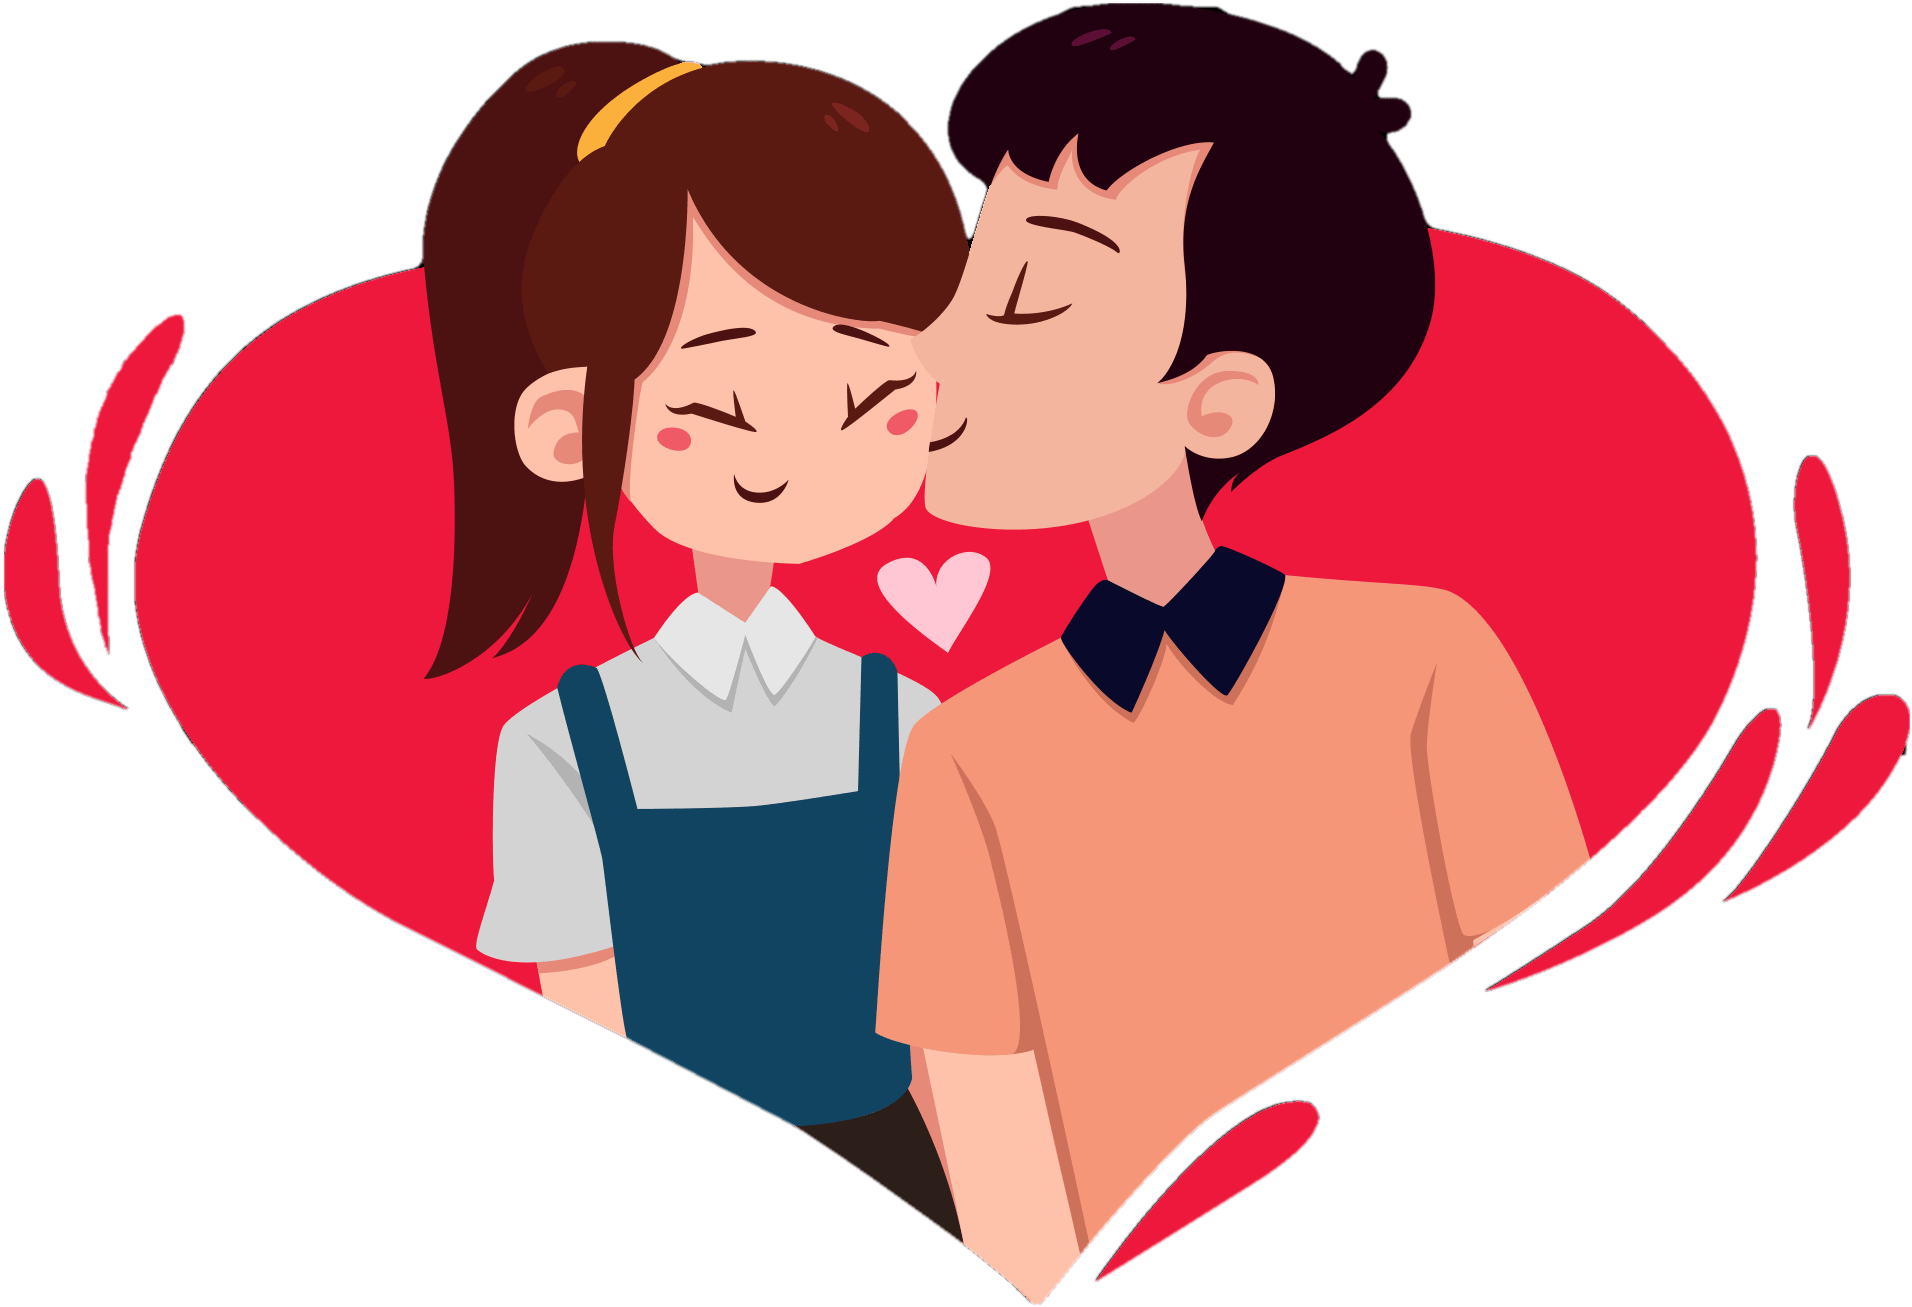 A Cartoon Of A Boy And Girl Kissing